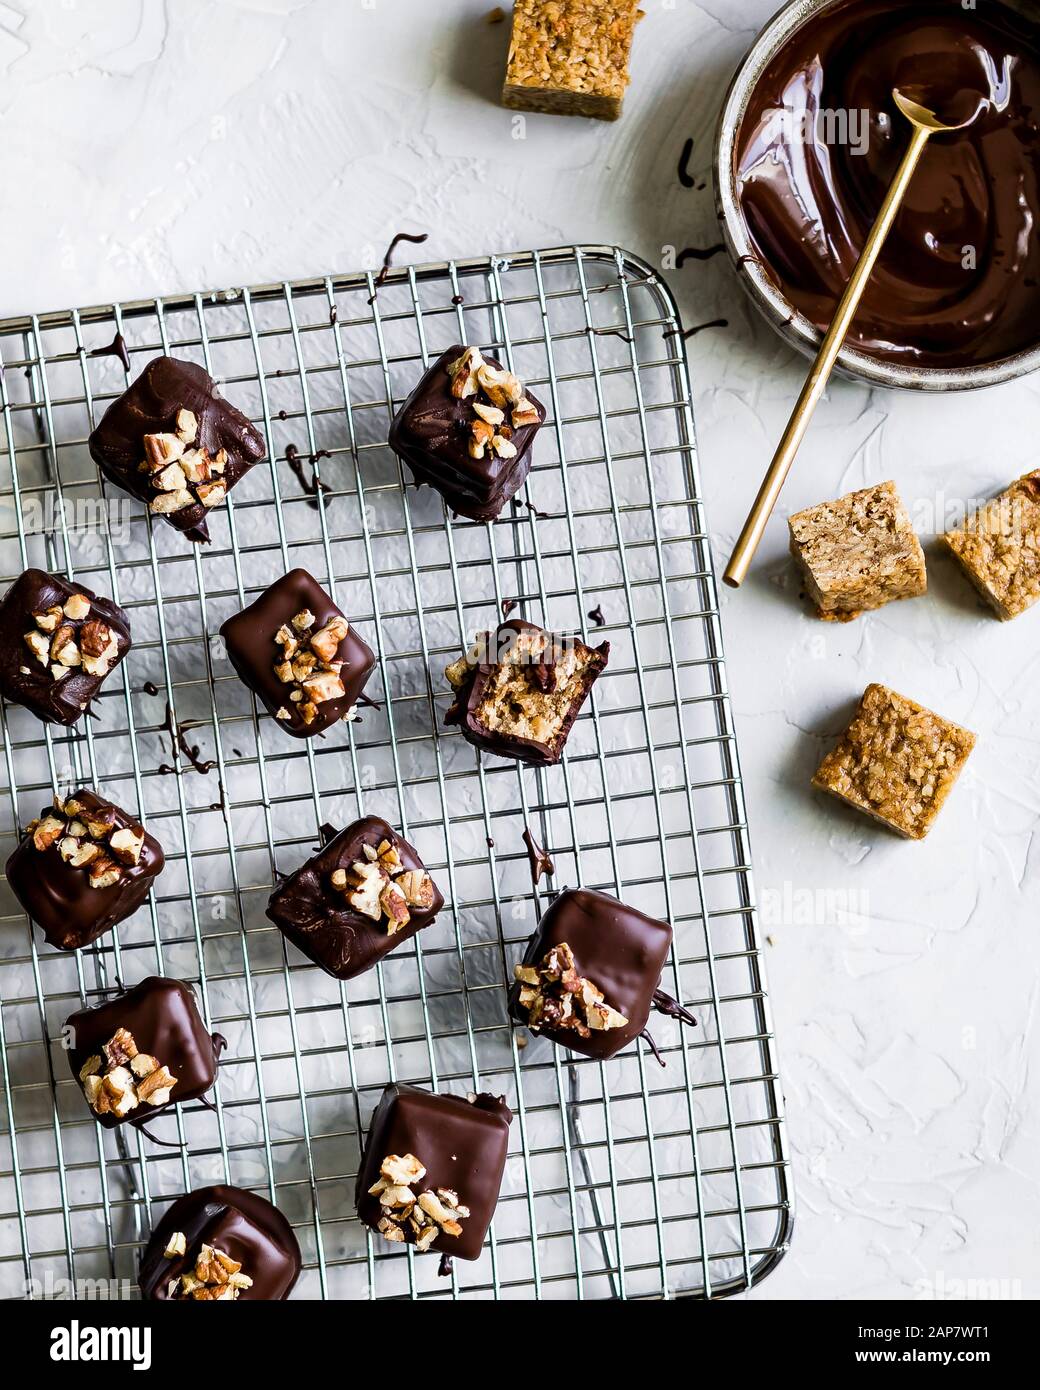 Maple pecan oat bars, dipped in dark chocolate, and sprinkled with toasted pecans on top. Stock Photo